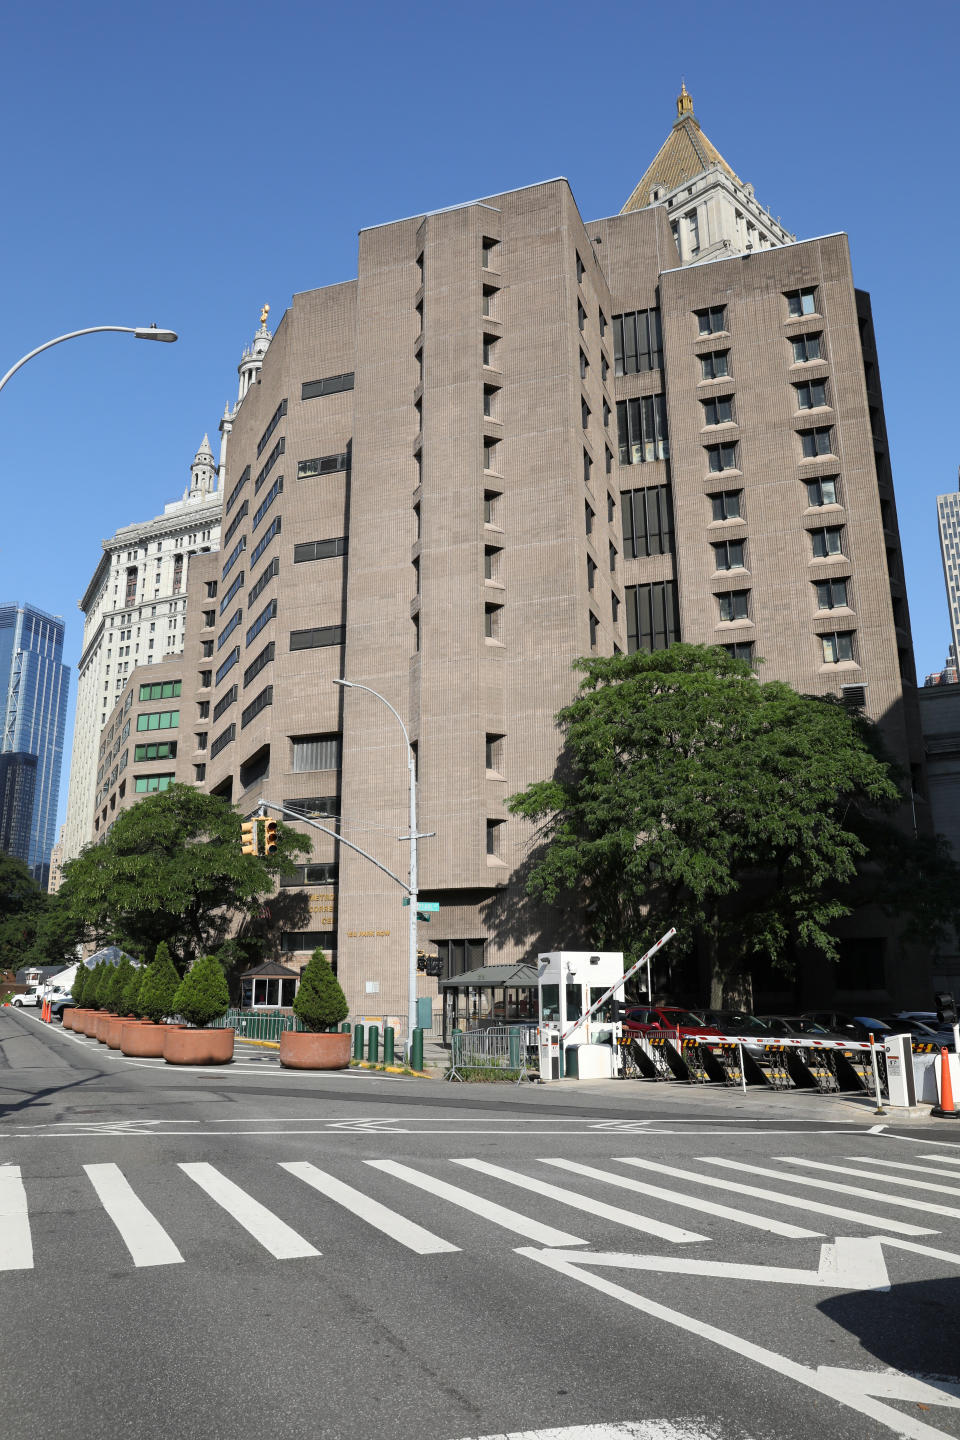 Epstein is being held at the Metropolitan Correctional Center in New York City. The 66-year-old was found unconscious with injuries to his neck, according multiple media outlets citing unidentified sources. (Photo: Brendan McDermid / Reuters)